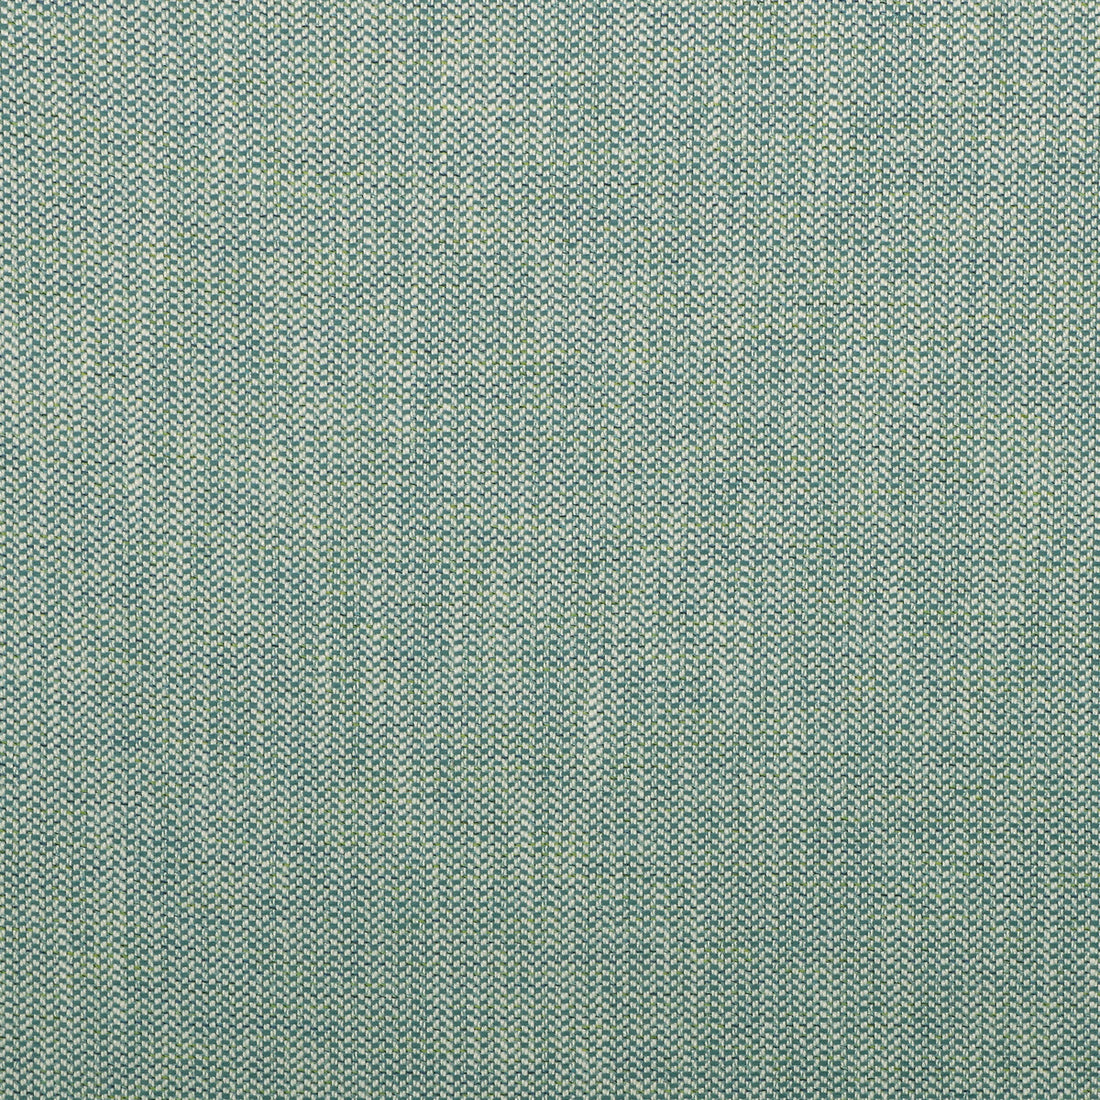 Kravet Smart fabric in 35514-513 color - pattern 35514.513.0 - by Kravet Smart in the Inside Out Performance Fabrics collection